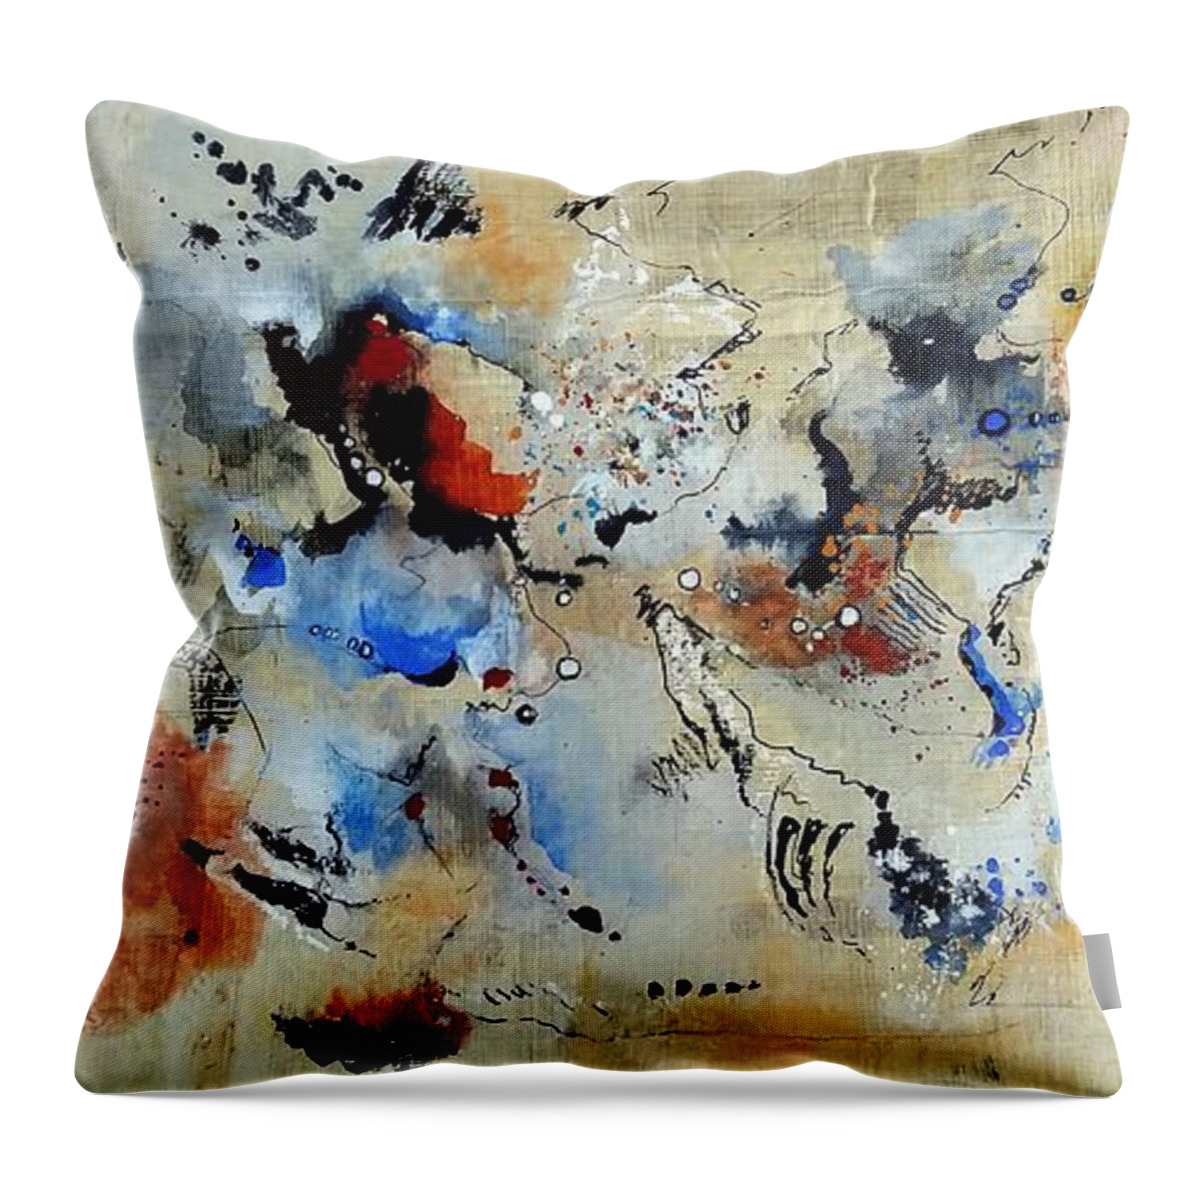 Papyruspainting Throw Pillow featuring the painting Papyrus Painting No.3 by Wolfgang Schweizer